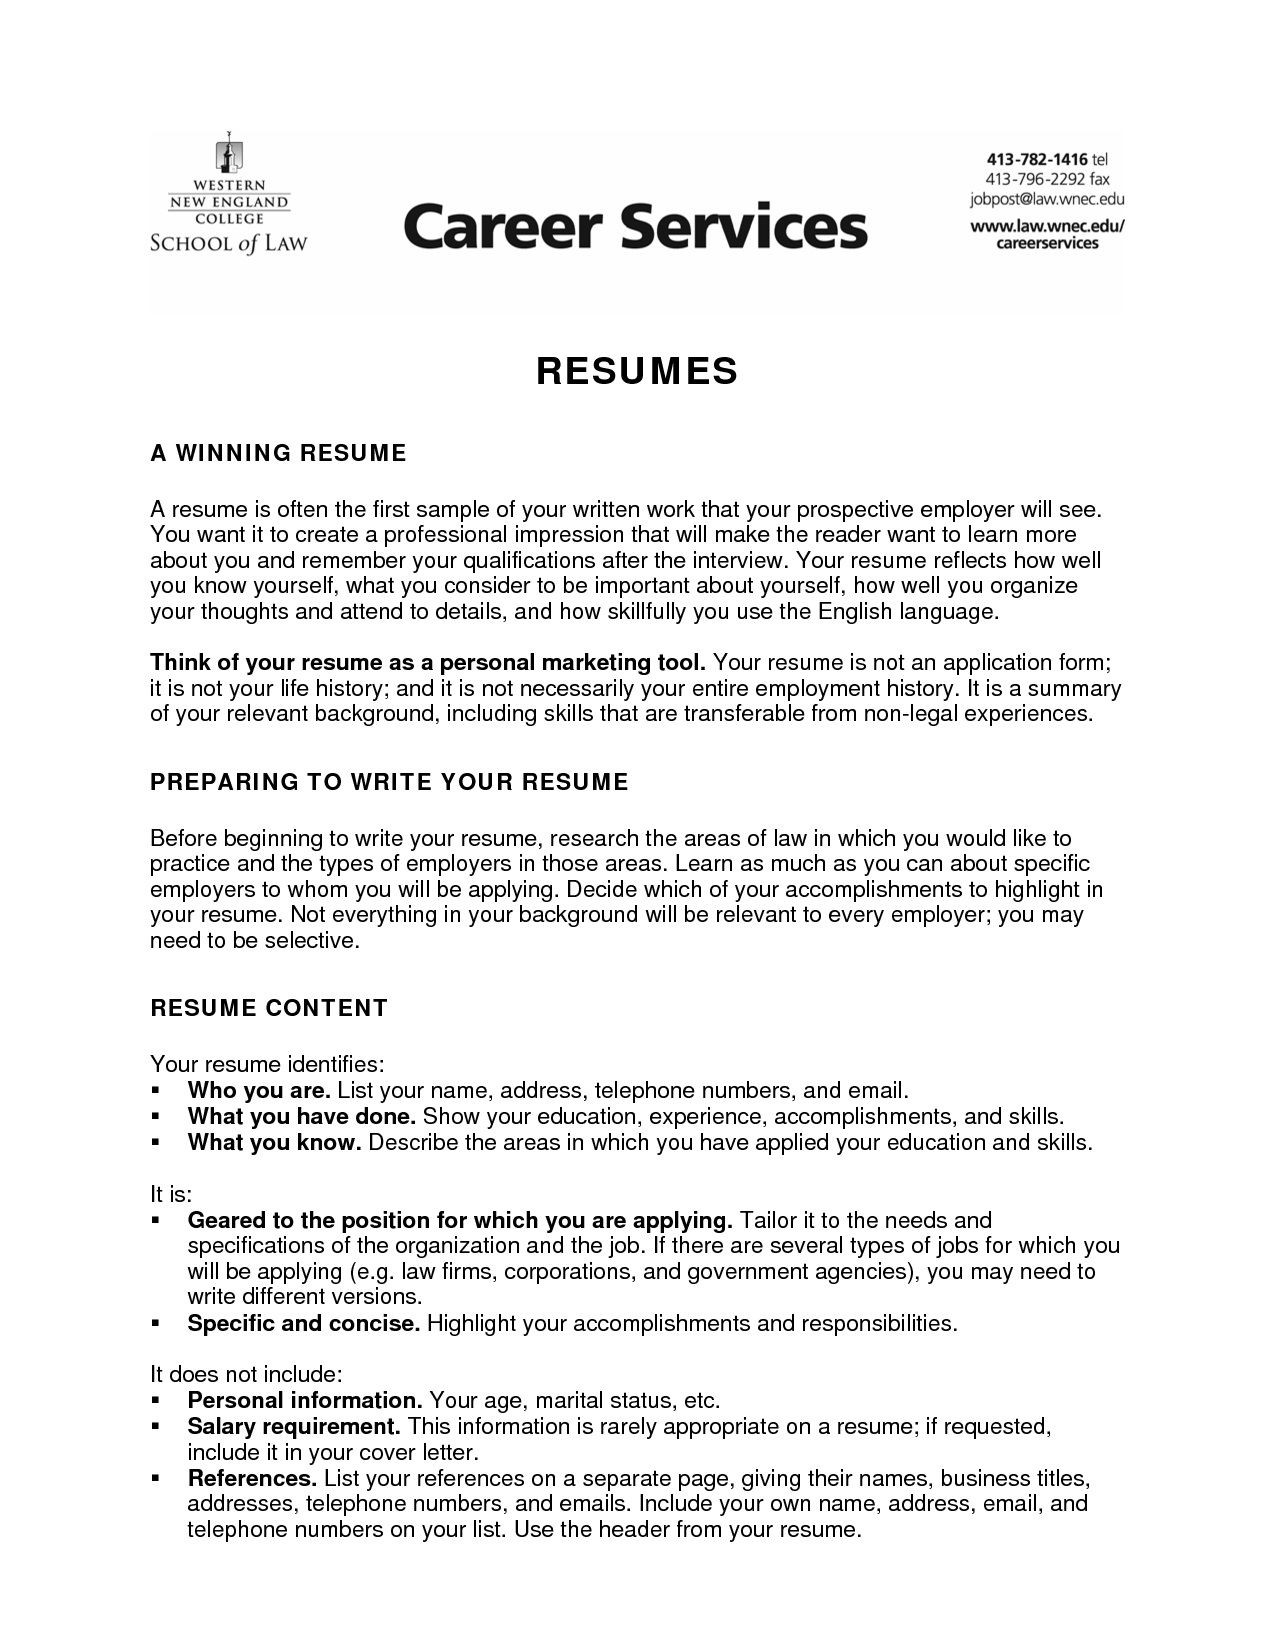 Sample Objective for College Student Resume God Objective for Resume Colege Student